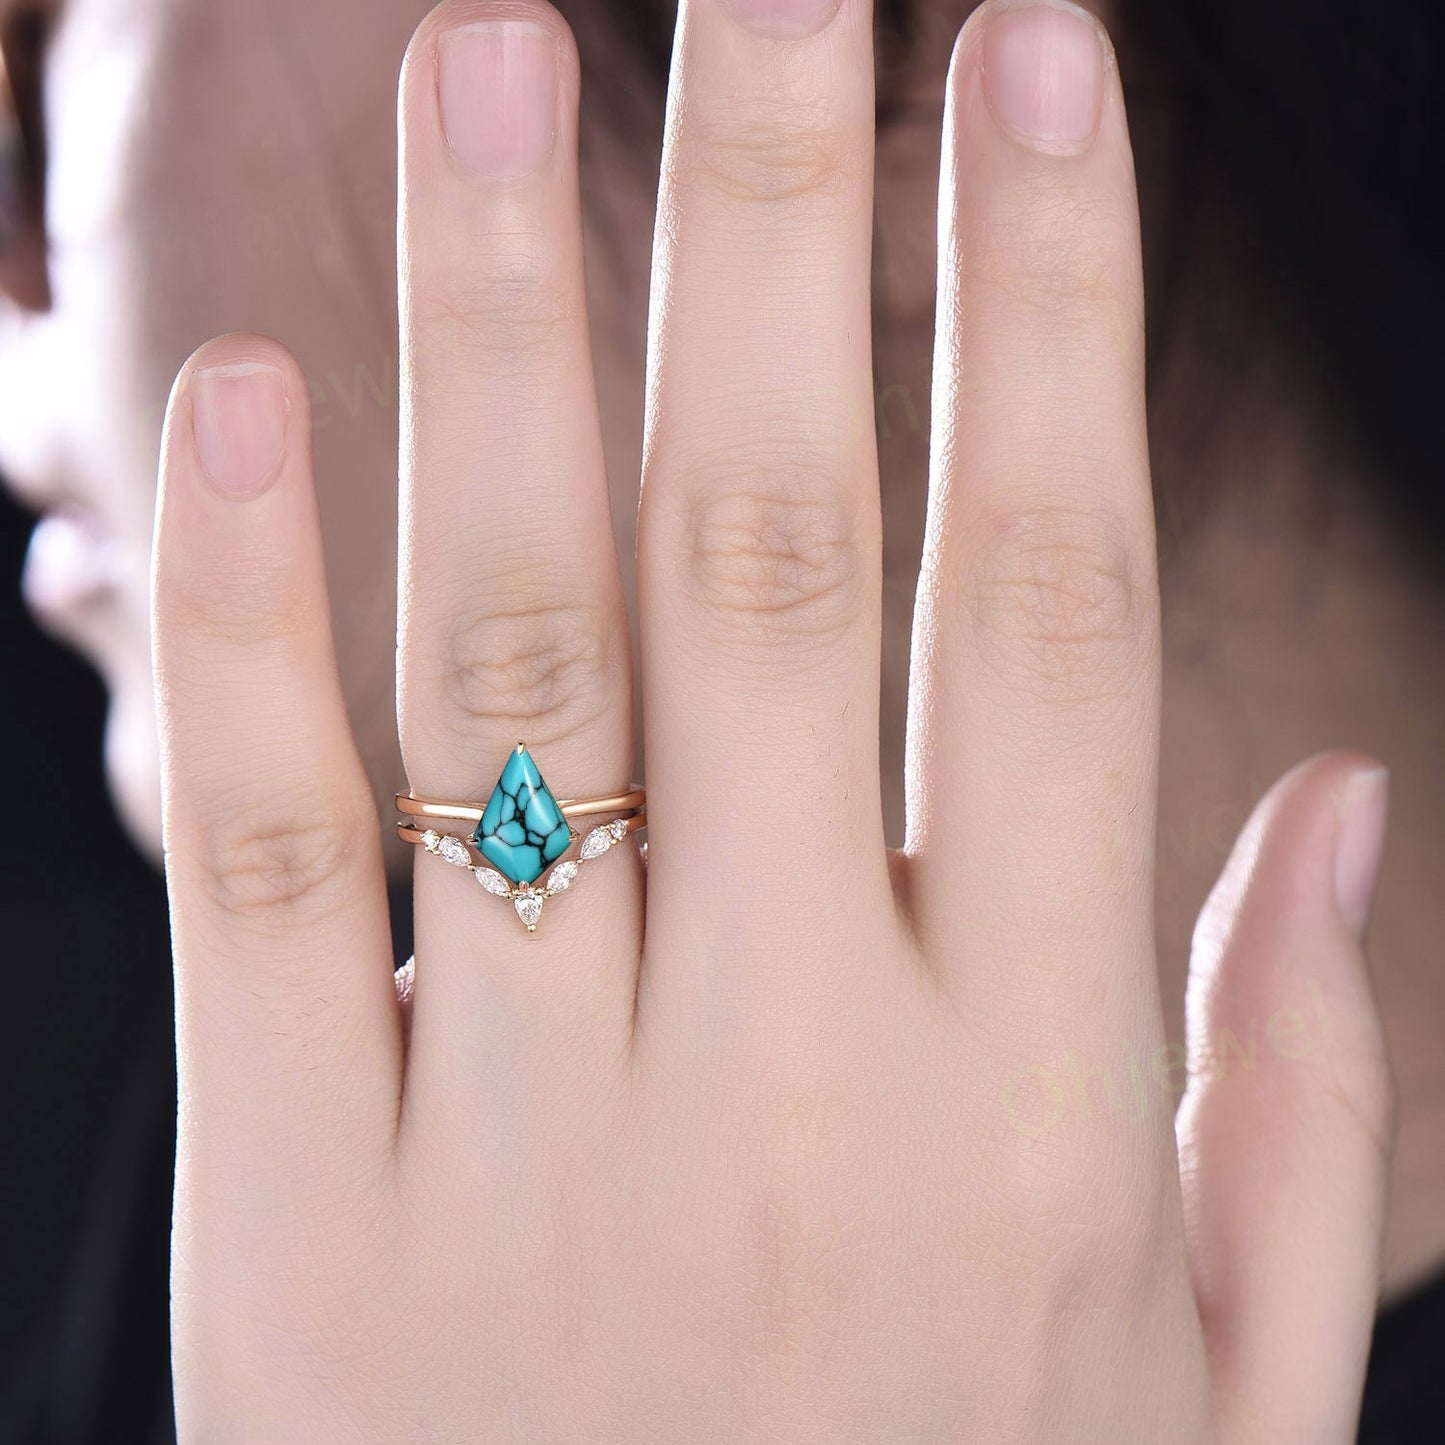 Kite natural Turquoise ring gold vintage unique engagement ring set Solitaire bridal wedding ring set women marquise moissanite ring gift